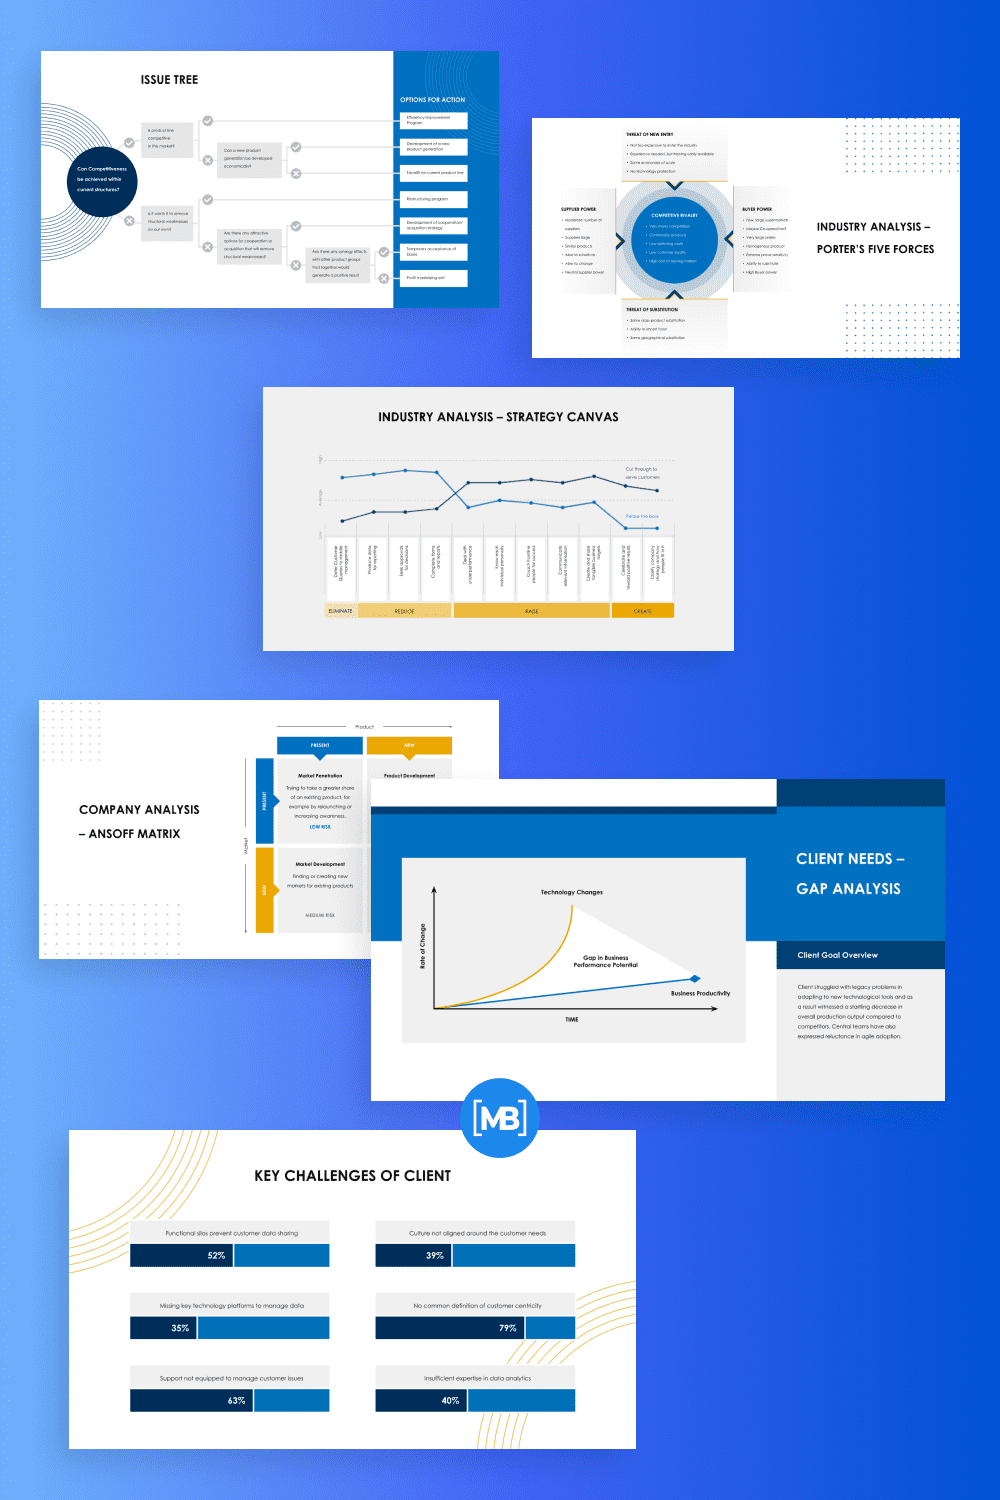 Business case study powerpoint template.